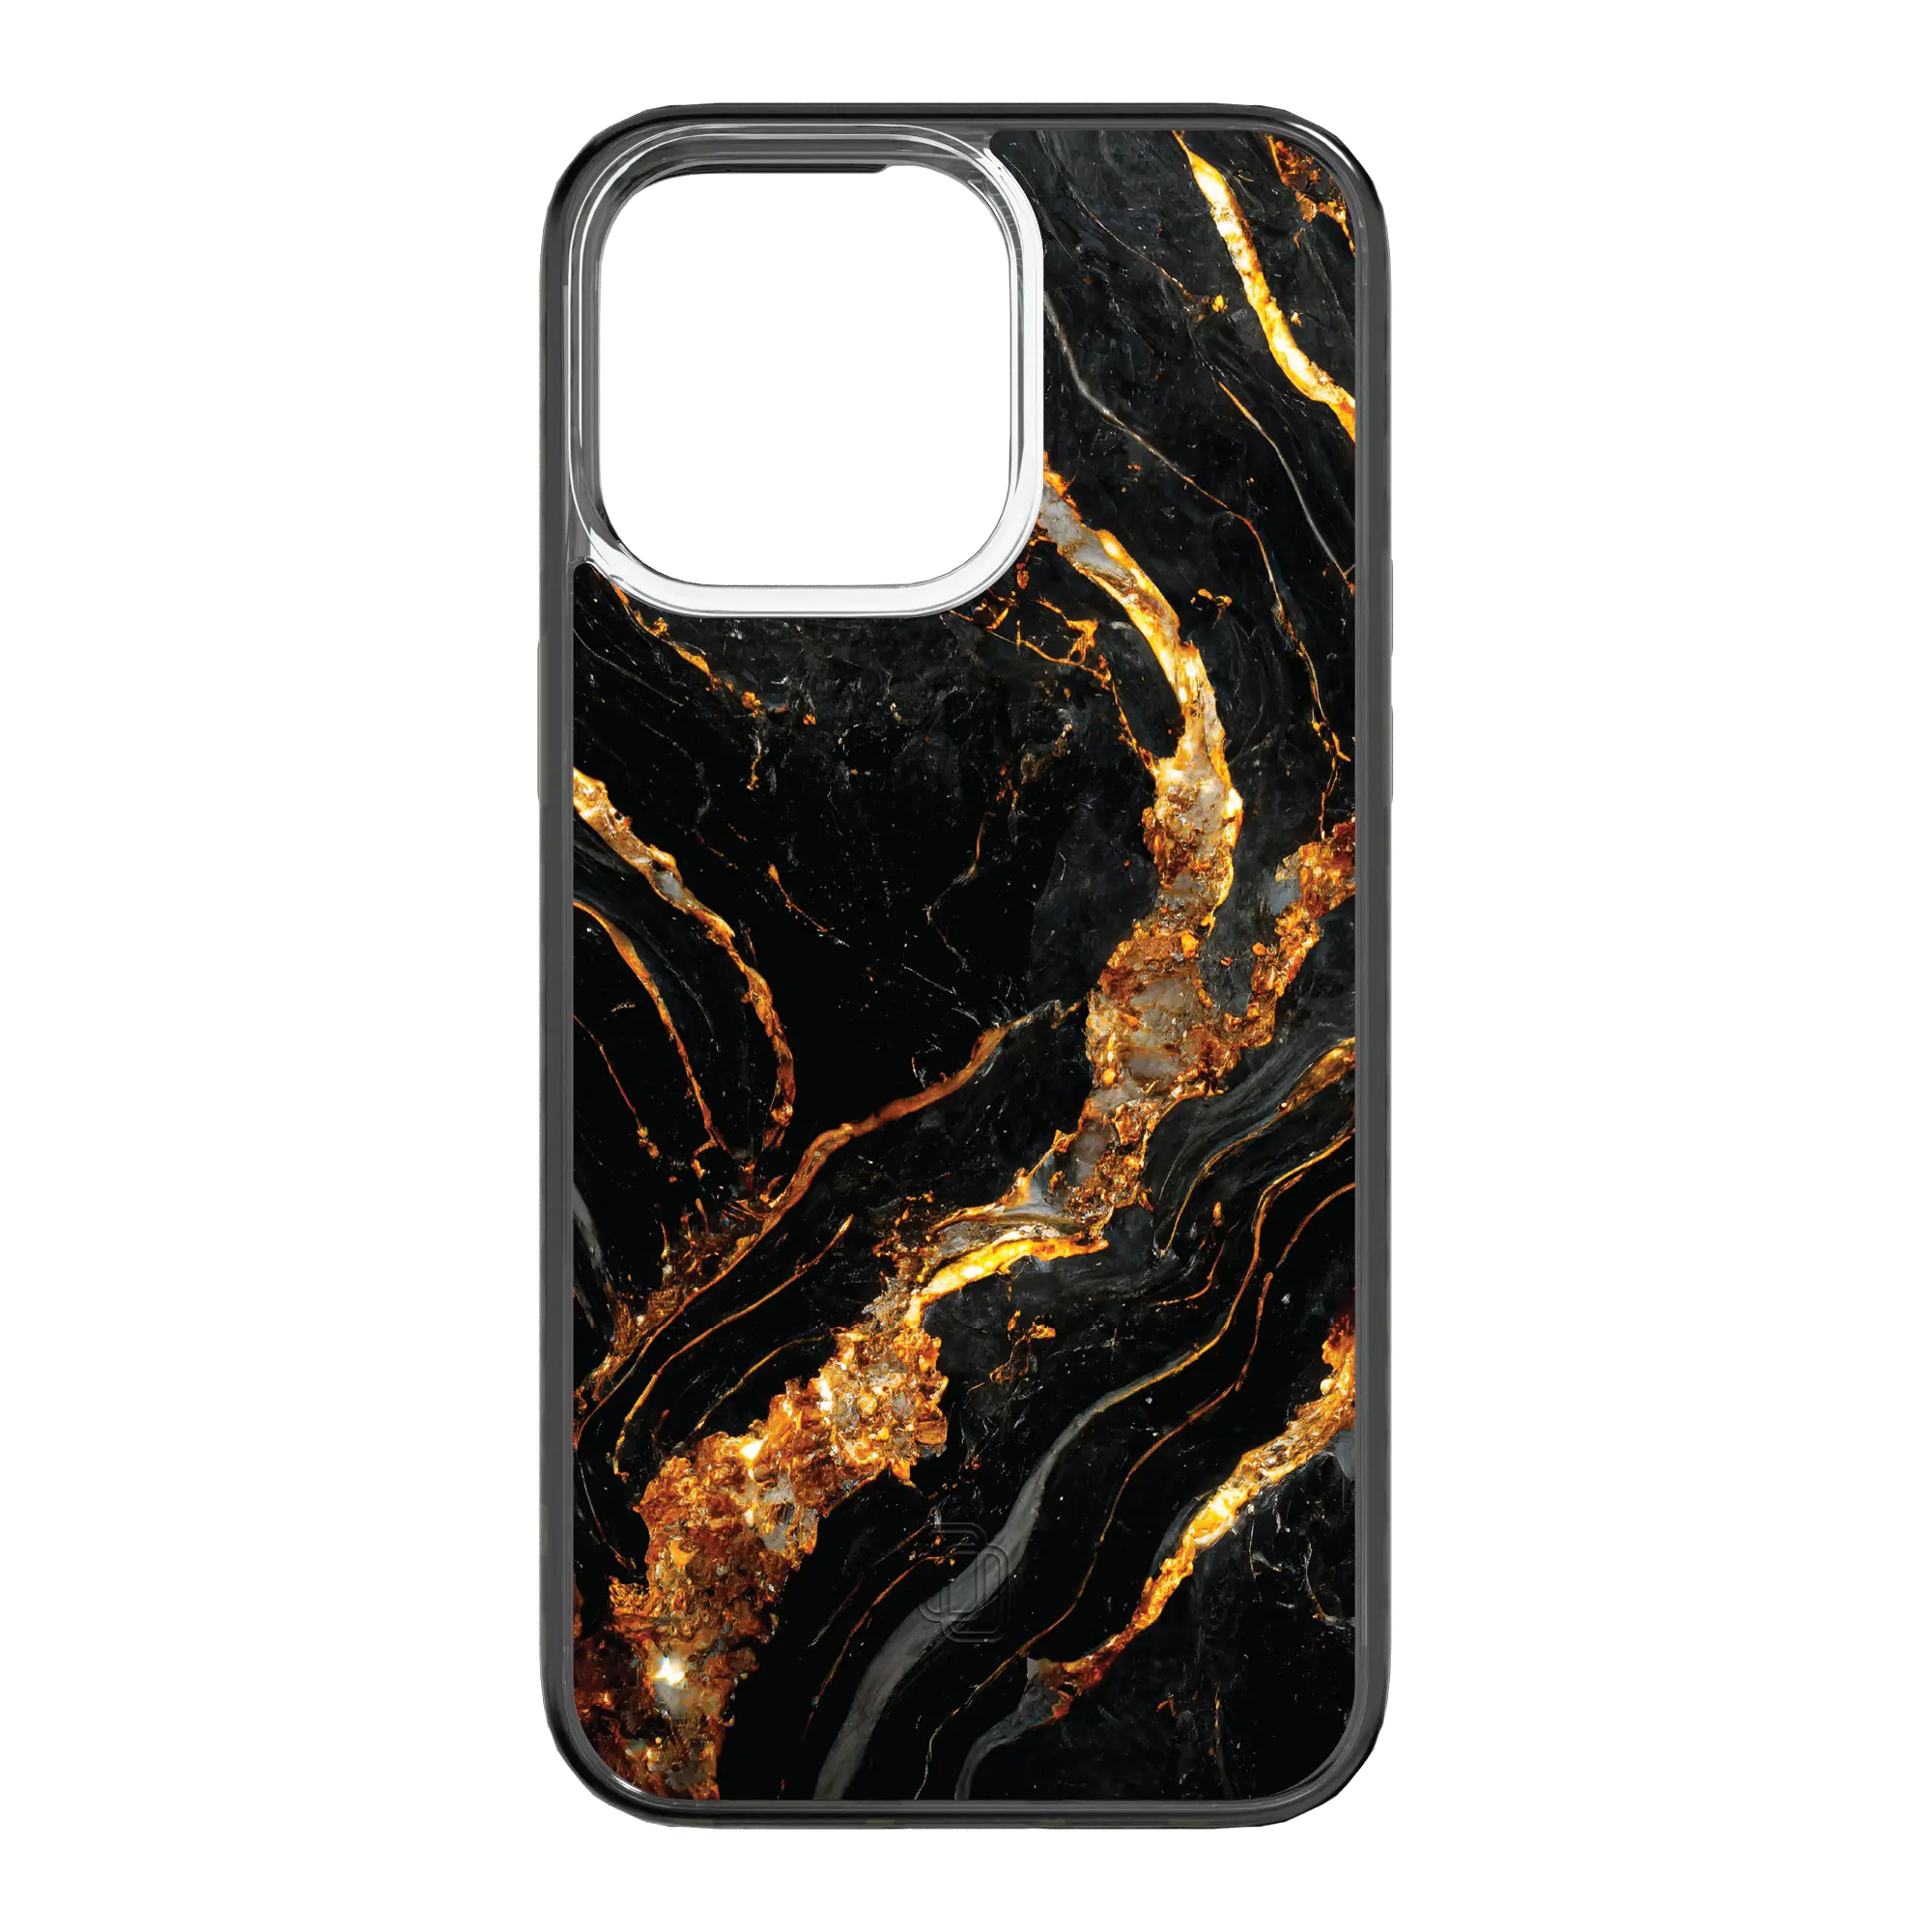 Apple-iPhone-15-Pro-Max-Onyx-Black Dark Knight | Protective MagSafe Case | Marble Stone Series for Apple iPhone 15 Series cellhelmet cellhelmet